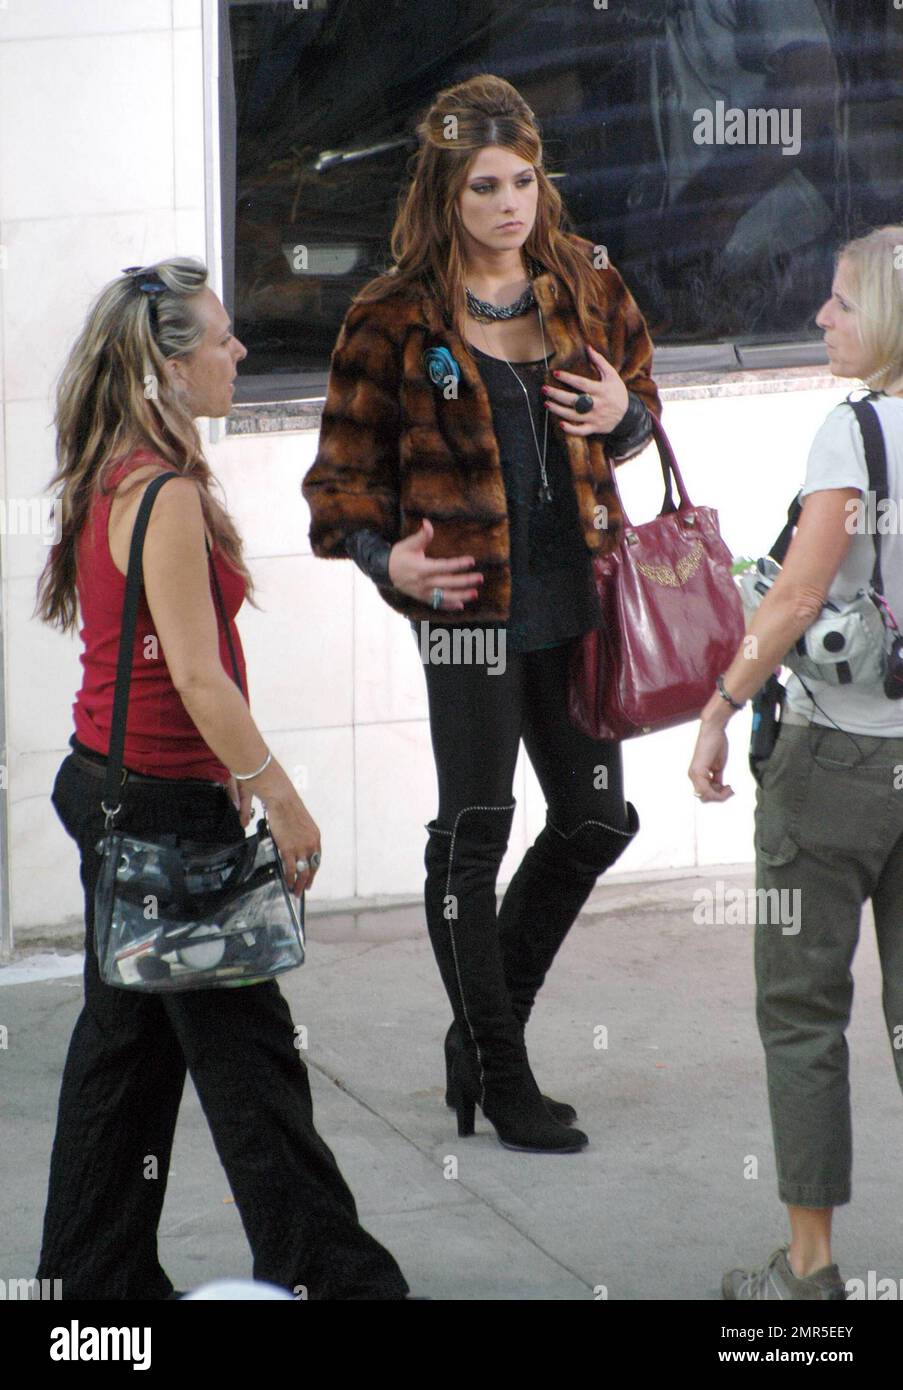 EXCLUSIVE!! Ashley Greene dons thigh high suede boots and a fur coat for  scenes in her latest movie LOL with Miley Cyrus. The actress is reportedly  dating Joe Jonas. Detroit, MI. 8/26/10